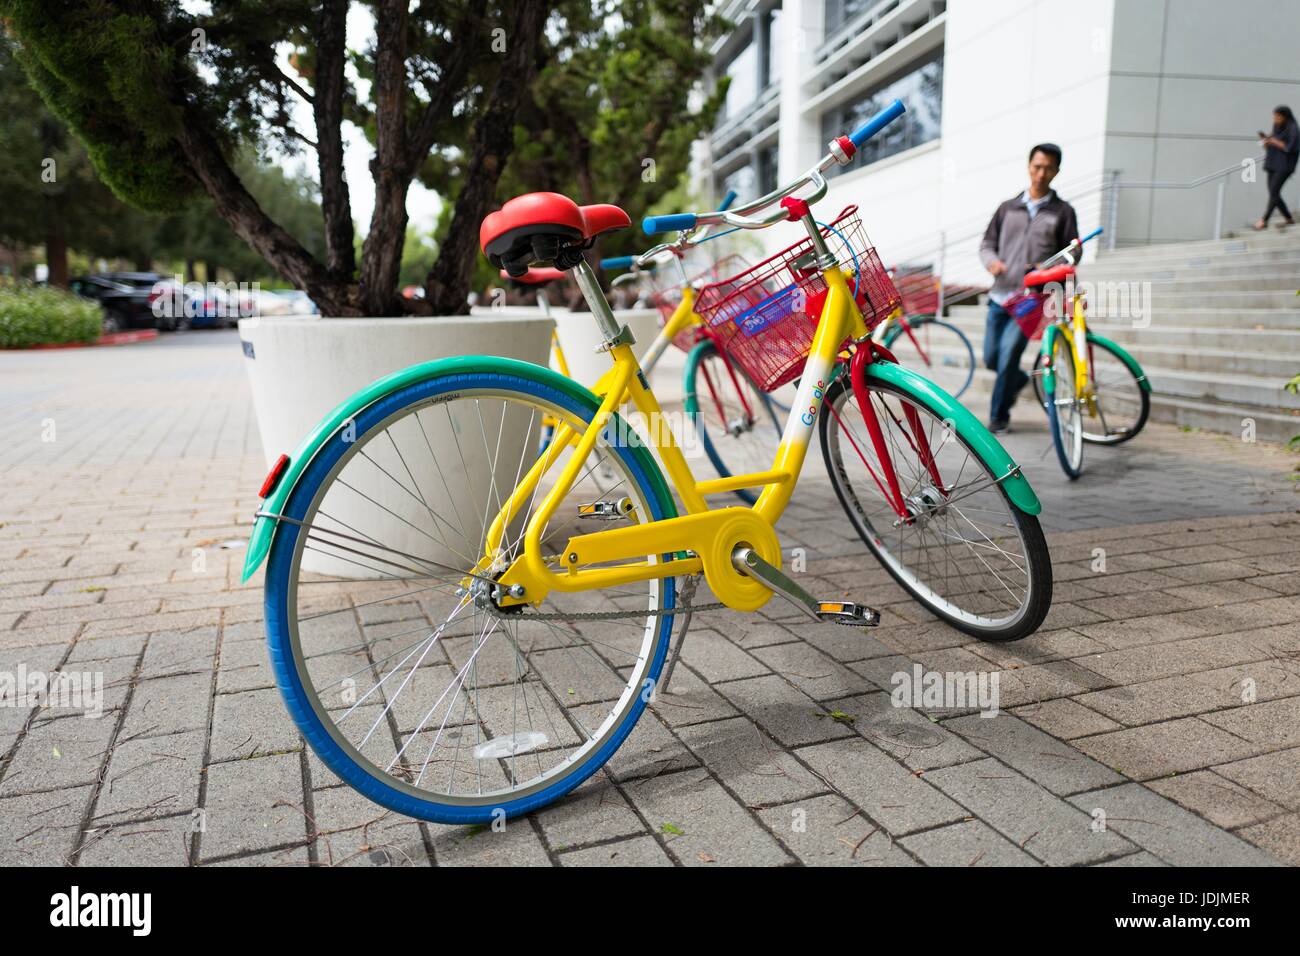 Closeup of a Google Bike, with a Google staff member approaching in the background, at the Googleplex, headquarters of Google Inc in the Silicon Valley town of Mountain View, California, April 7, 2017. Stock Photo